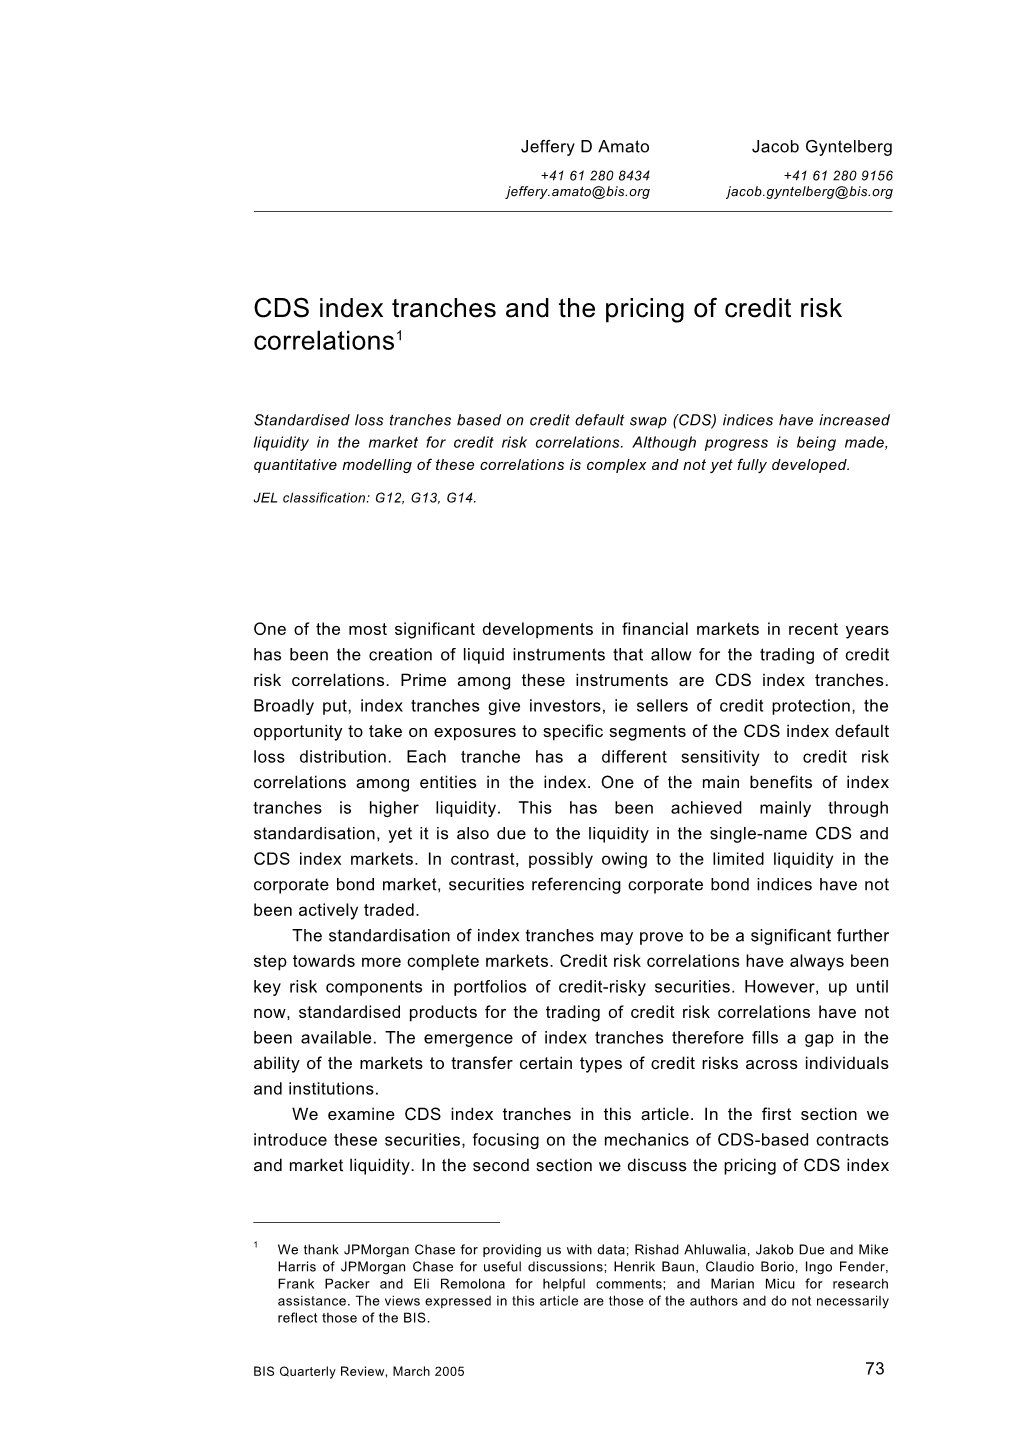 CDS Index Tranches and the Pricing of Credit Risk Correlations1